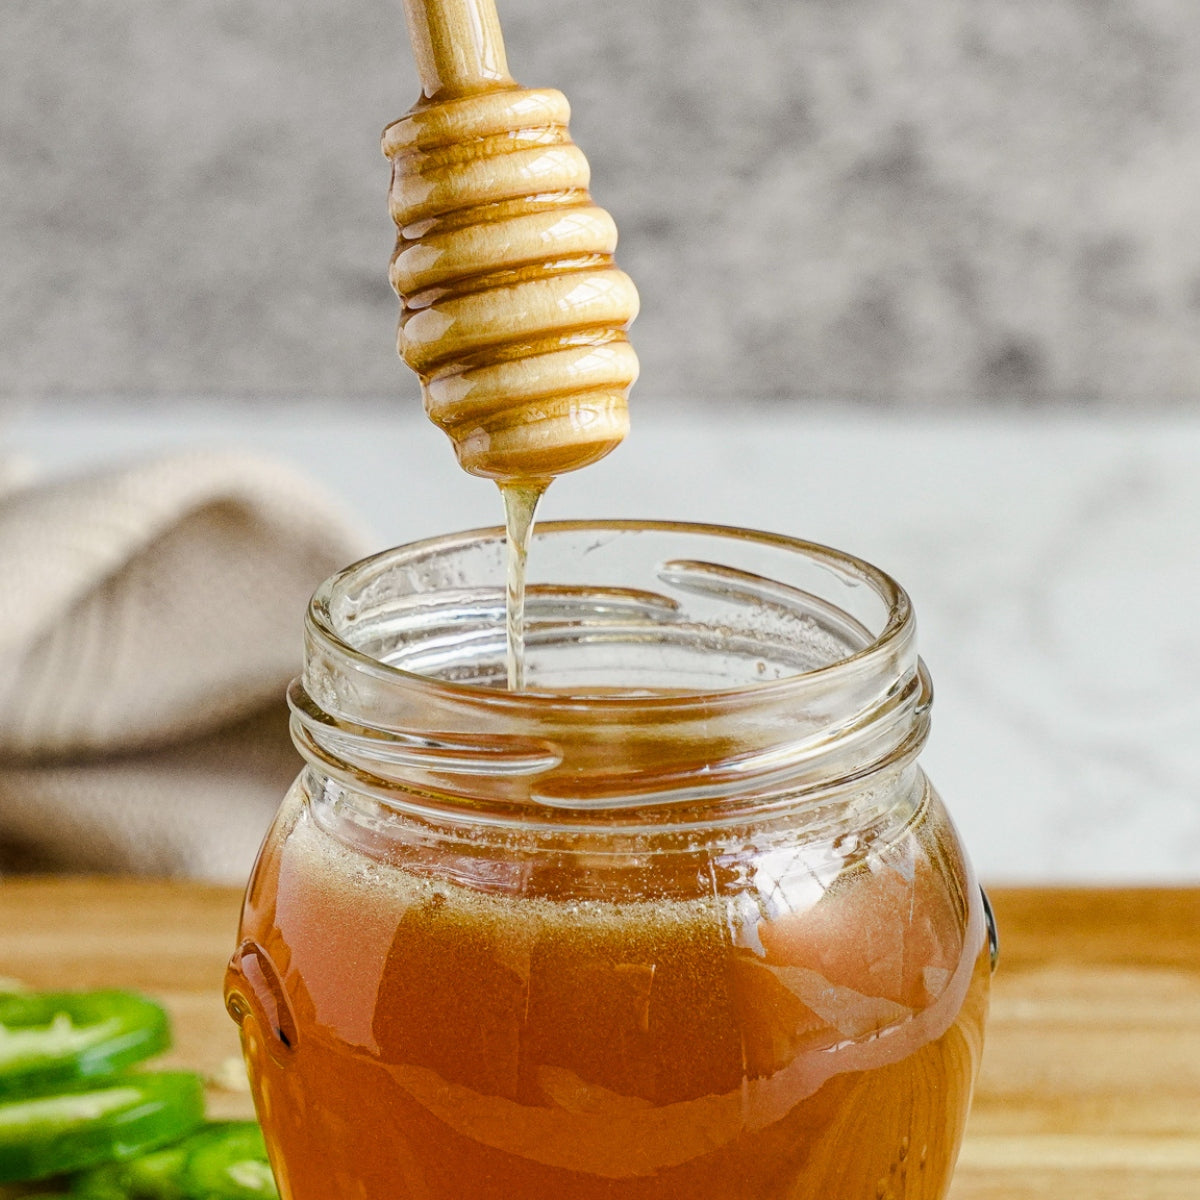 Hot honey being drizzled into a jar.